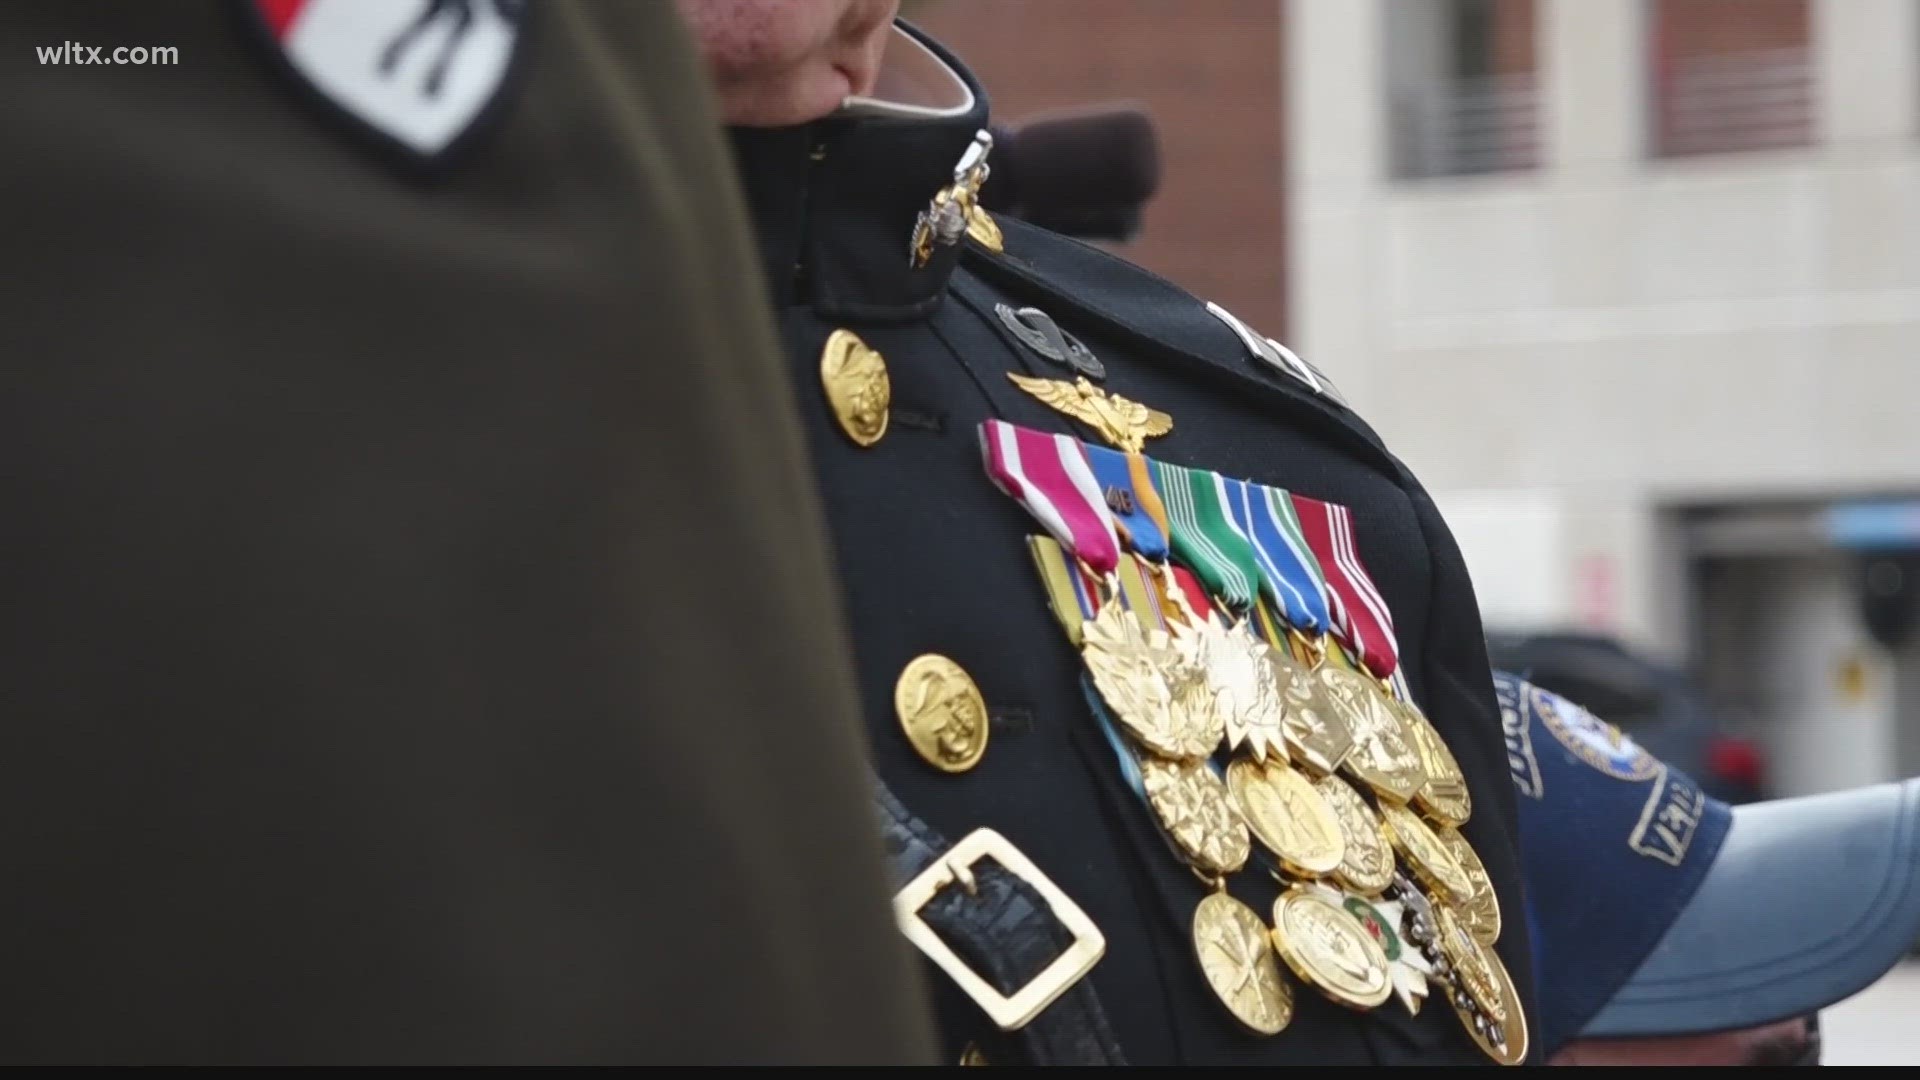 Here's a look how the Midlands is honoring veterans around Veterans Day.